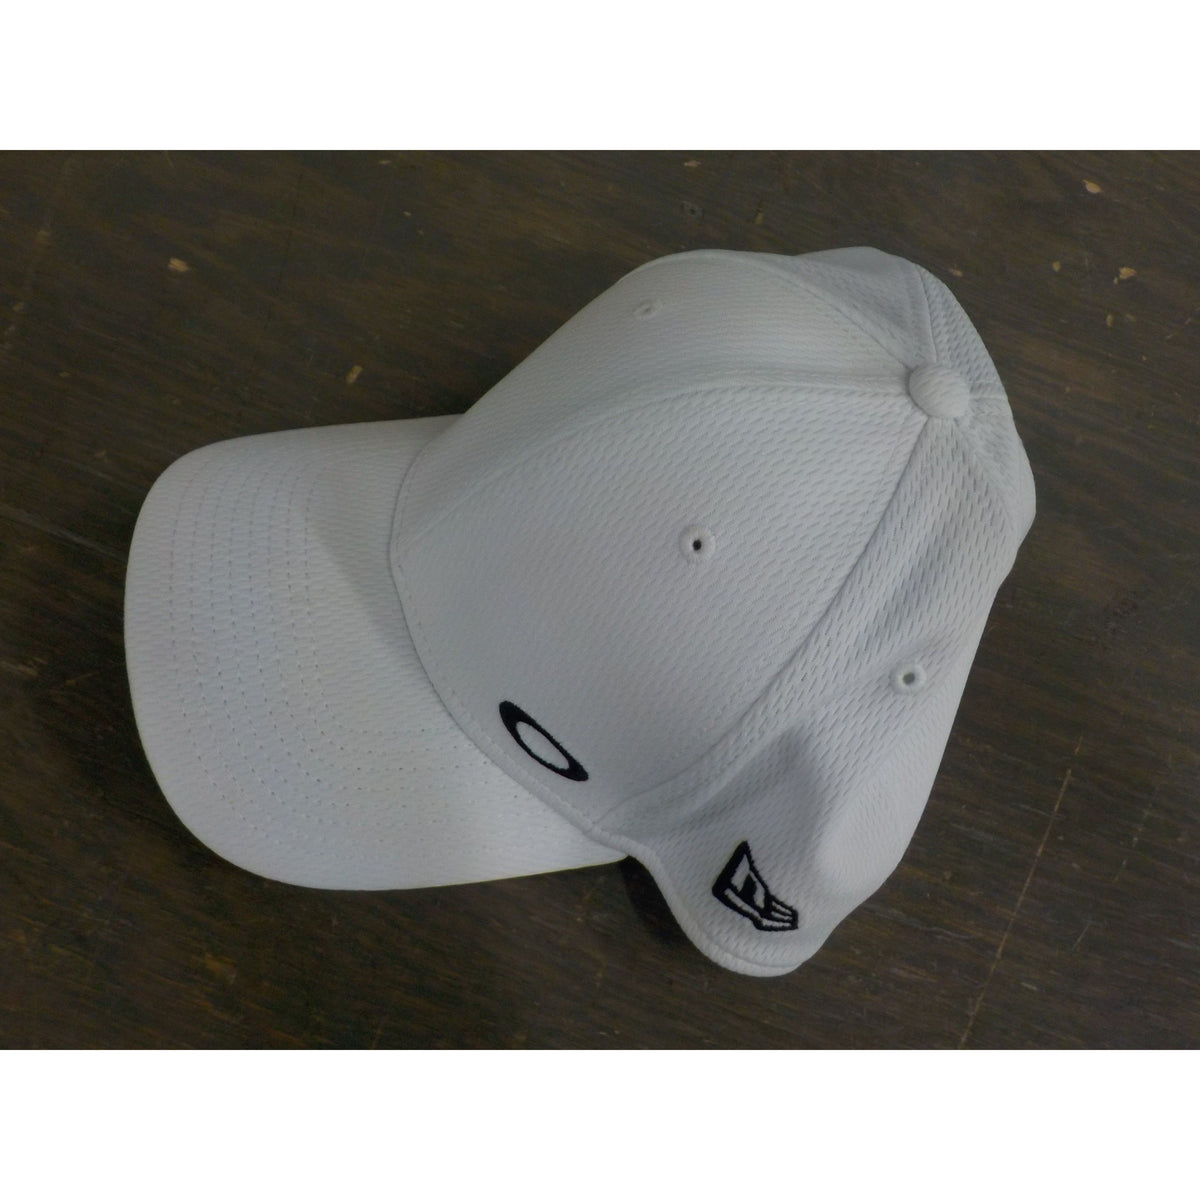 Oakley Tinfoil Cap 2.0 - White - Large/X-Large - Used - Acceptable